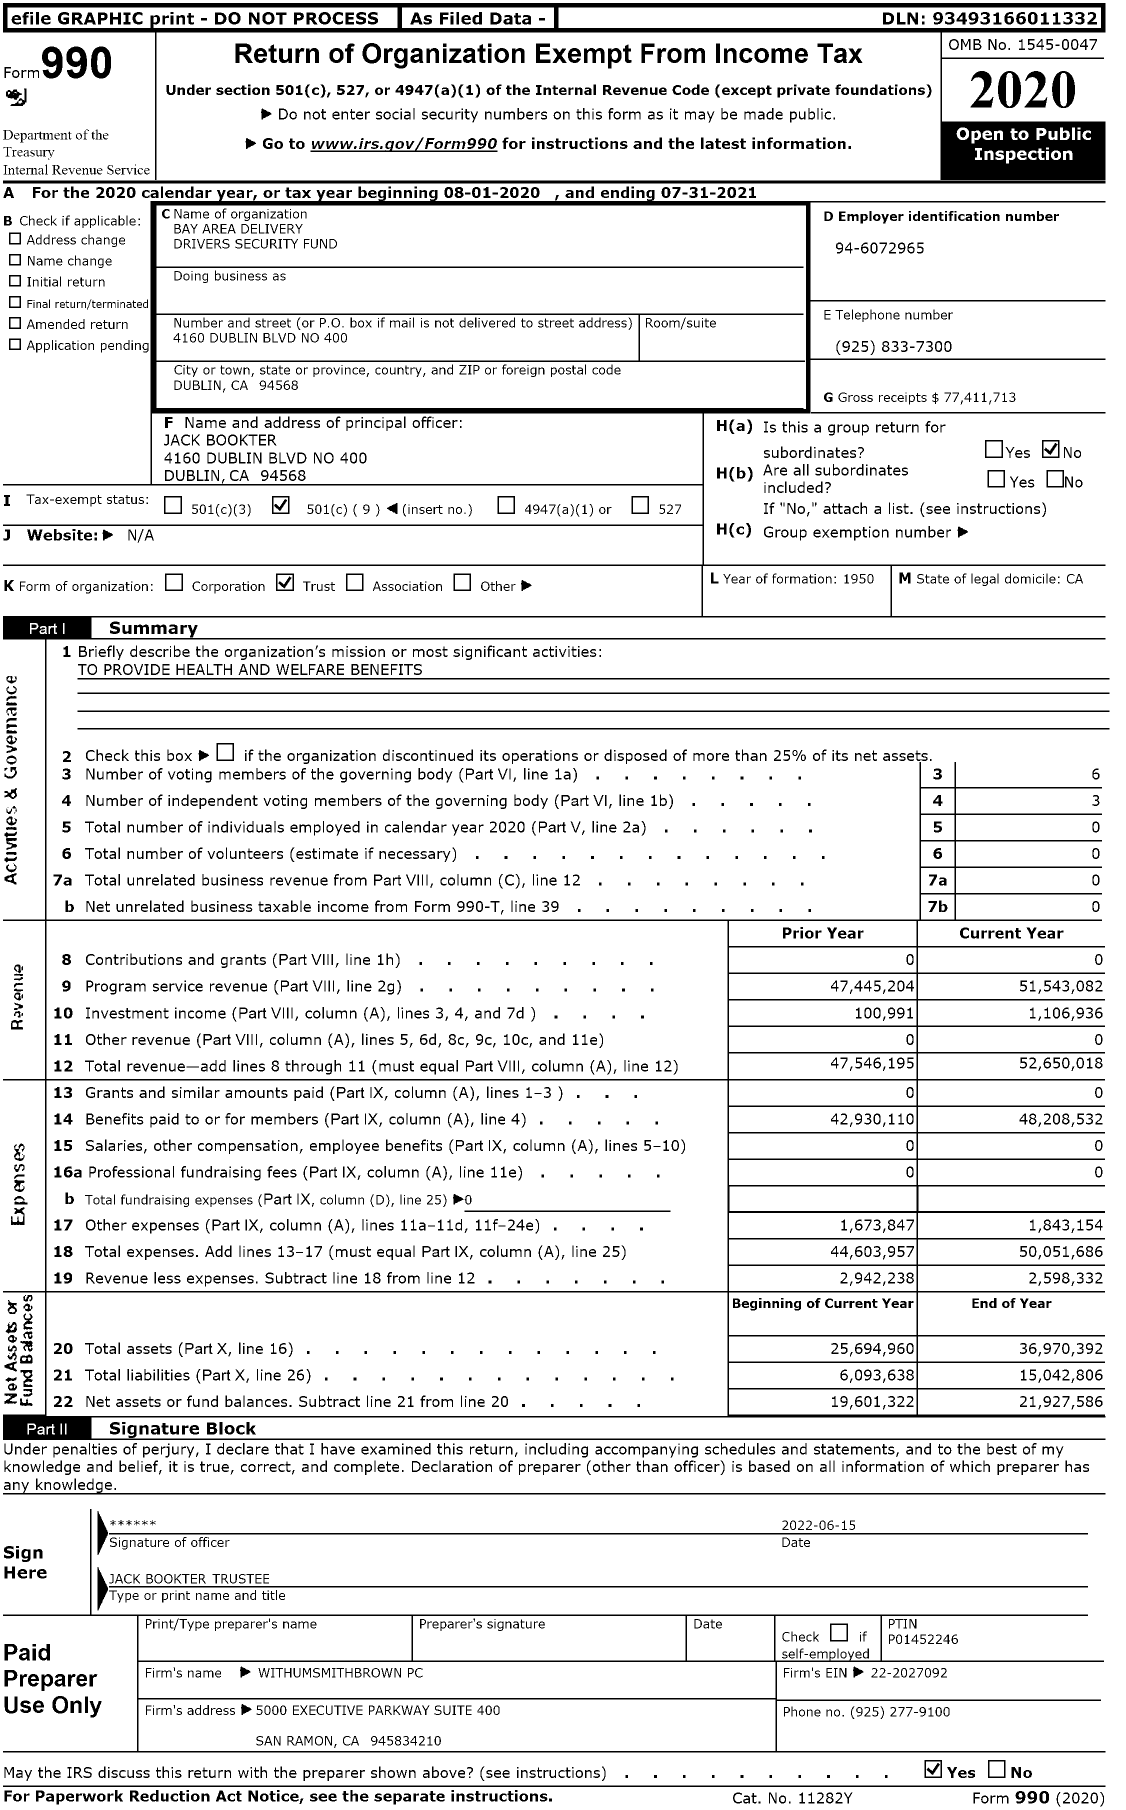 Image of first page of 2020 Form 990O for Bay Area Delivery Drivers Security Fund